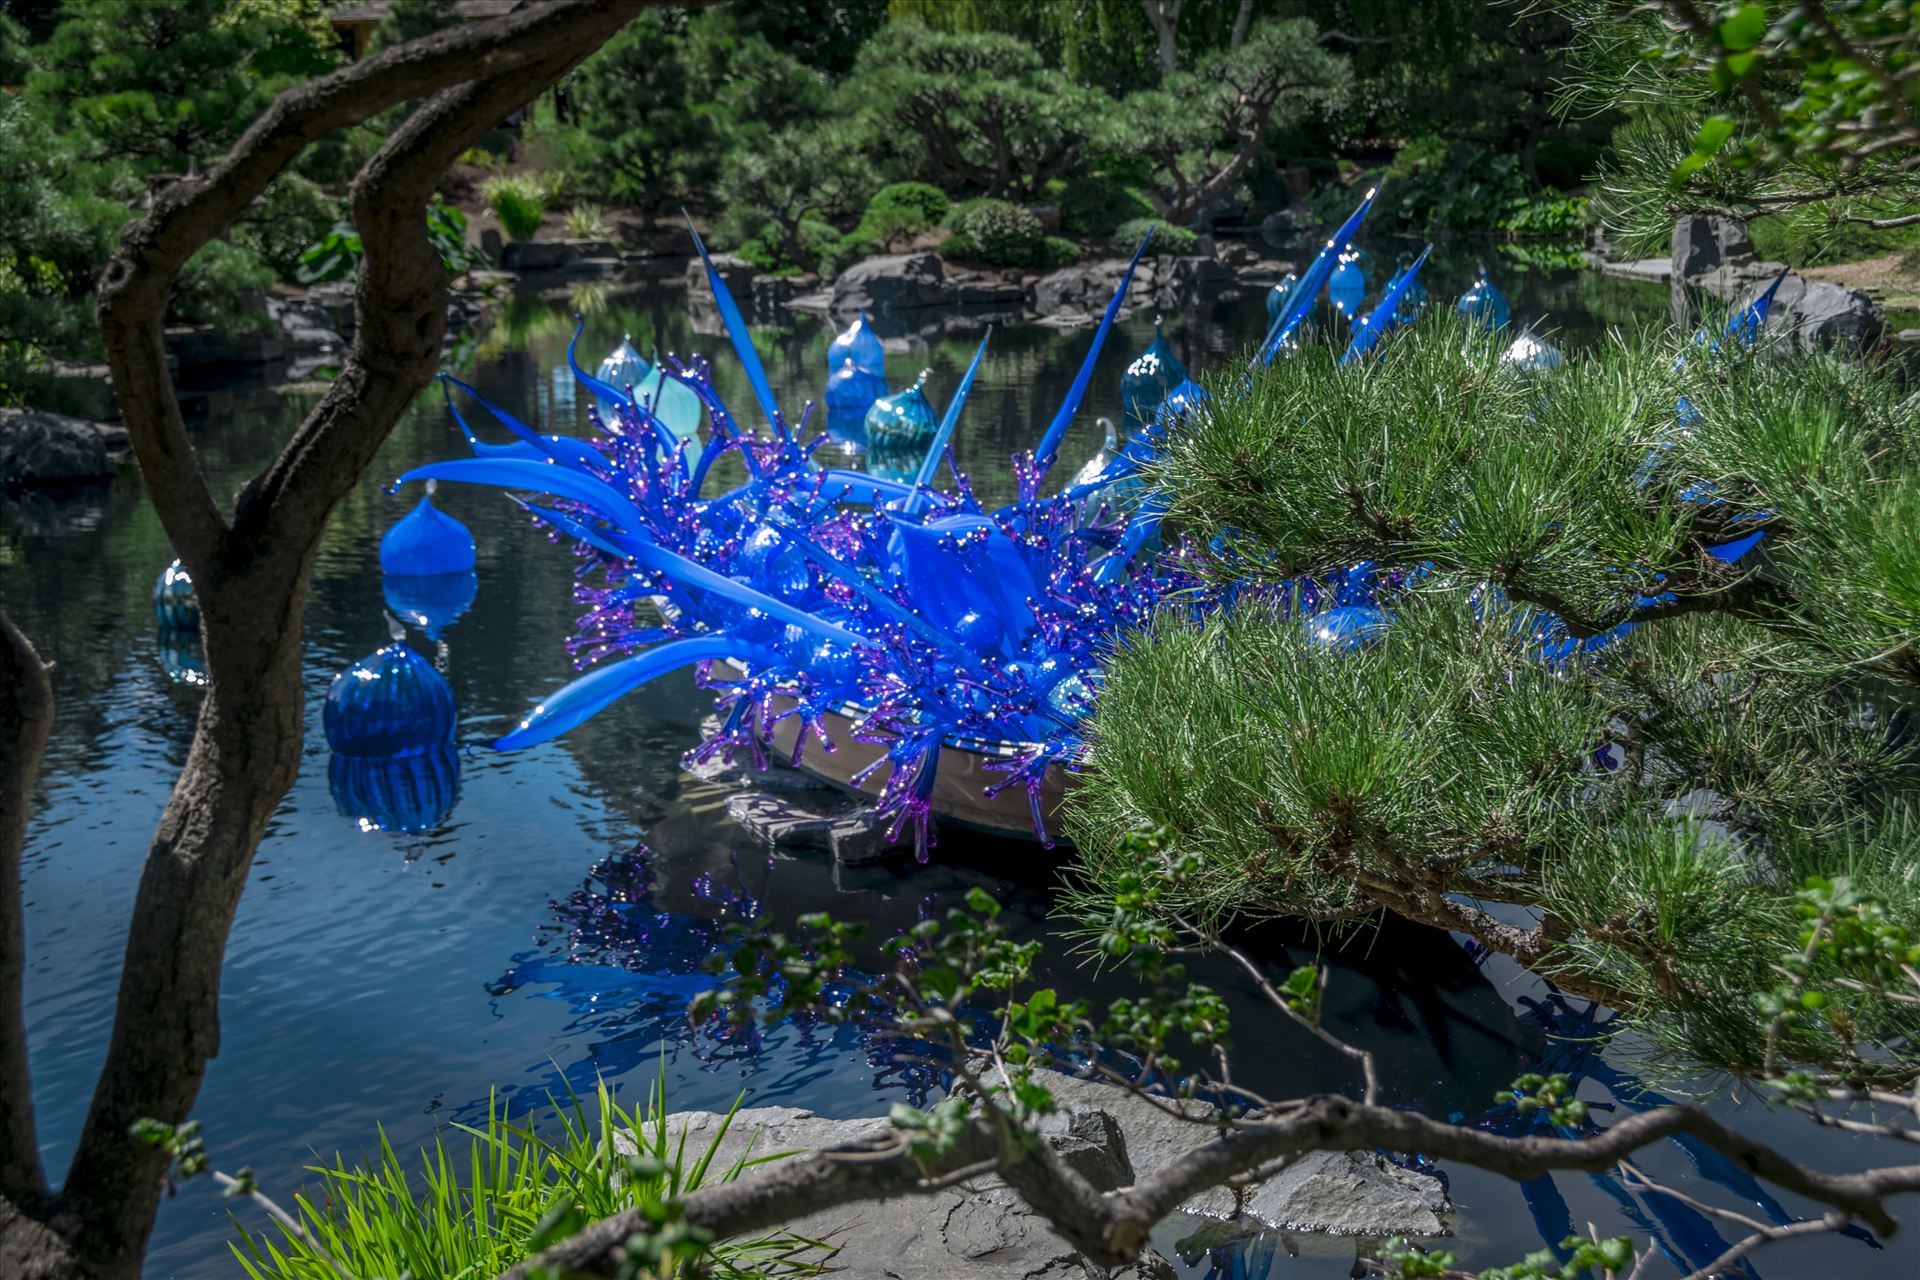 Chihuly Blue Boat 2.jpg -  by Dennis Rose